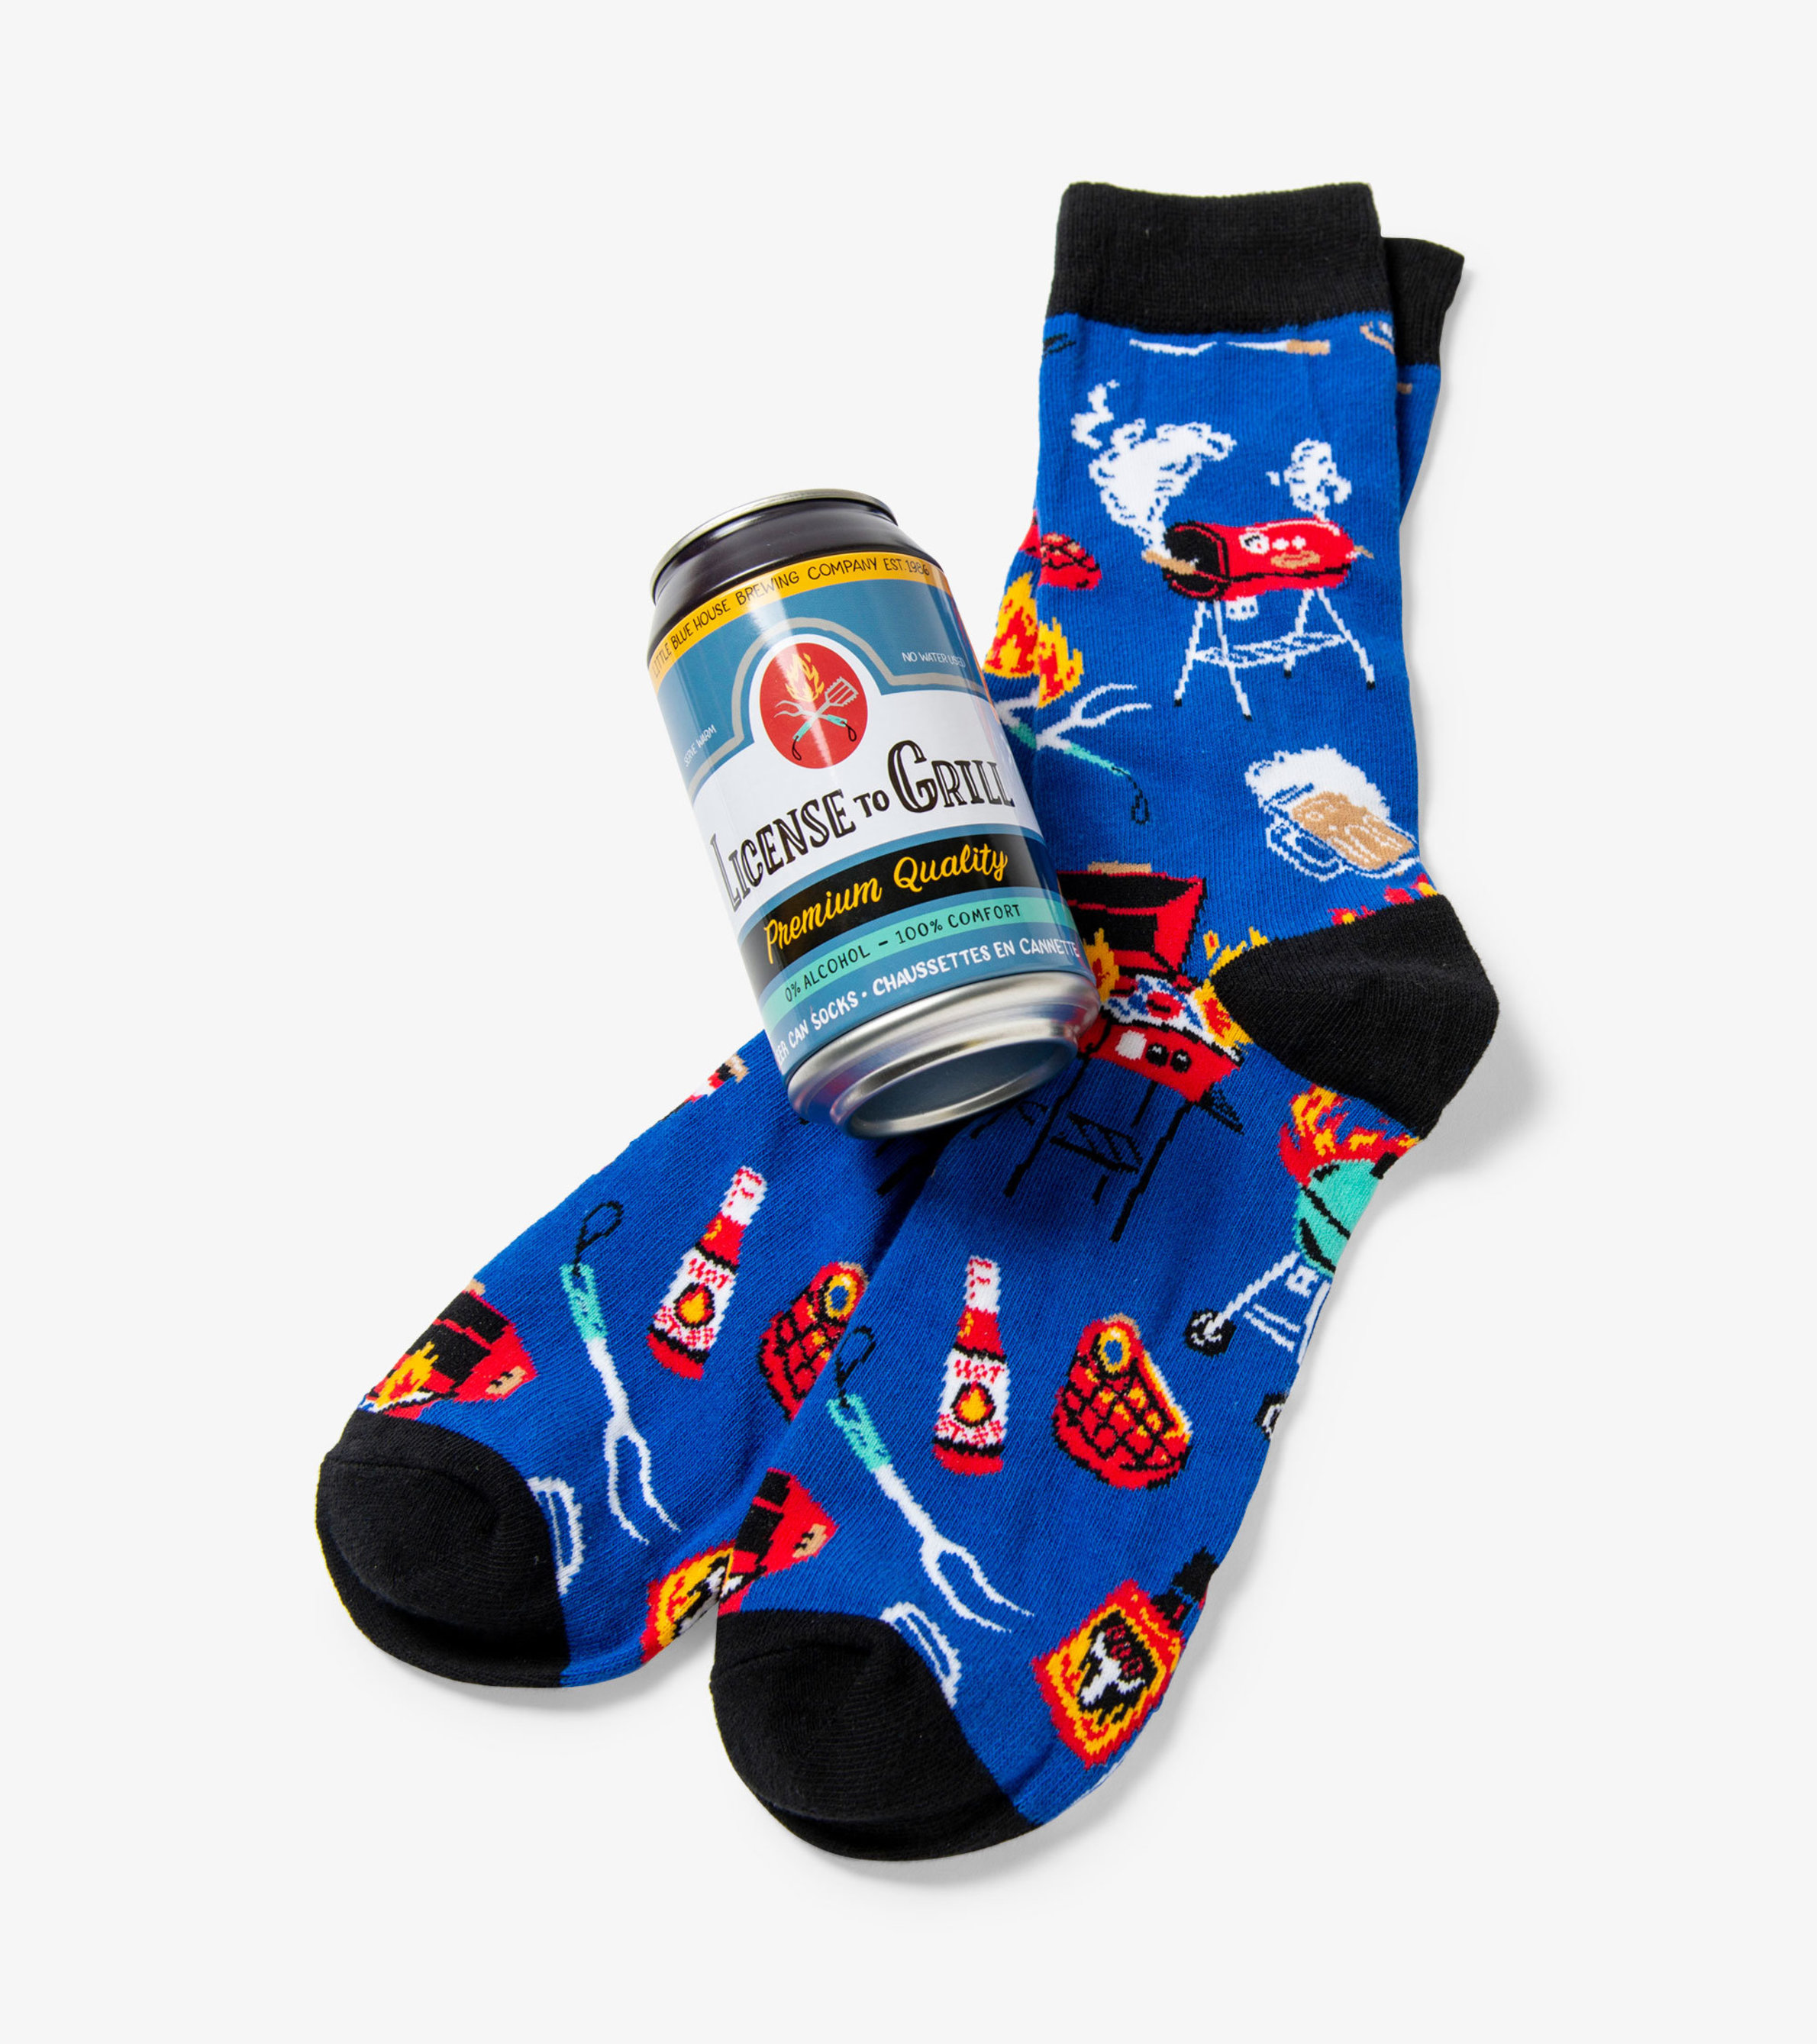 https://cdn.littlebluehouse.com/product_images/licence-to-grill-mens-beer-can-socks/BC1BABQ001_jpg/pdp_zoom.jpg?c=1587591189&locale=us_en